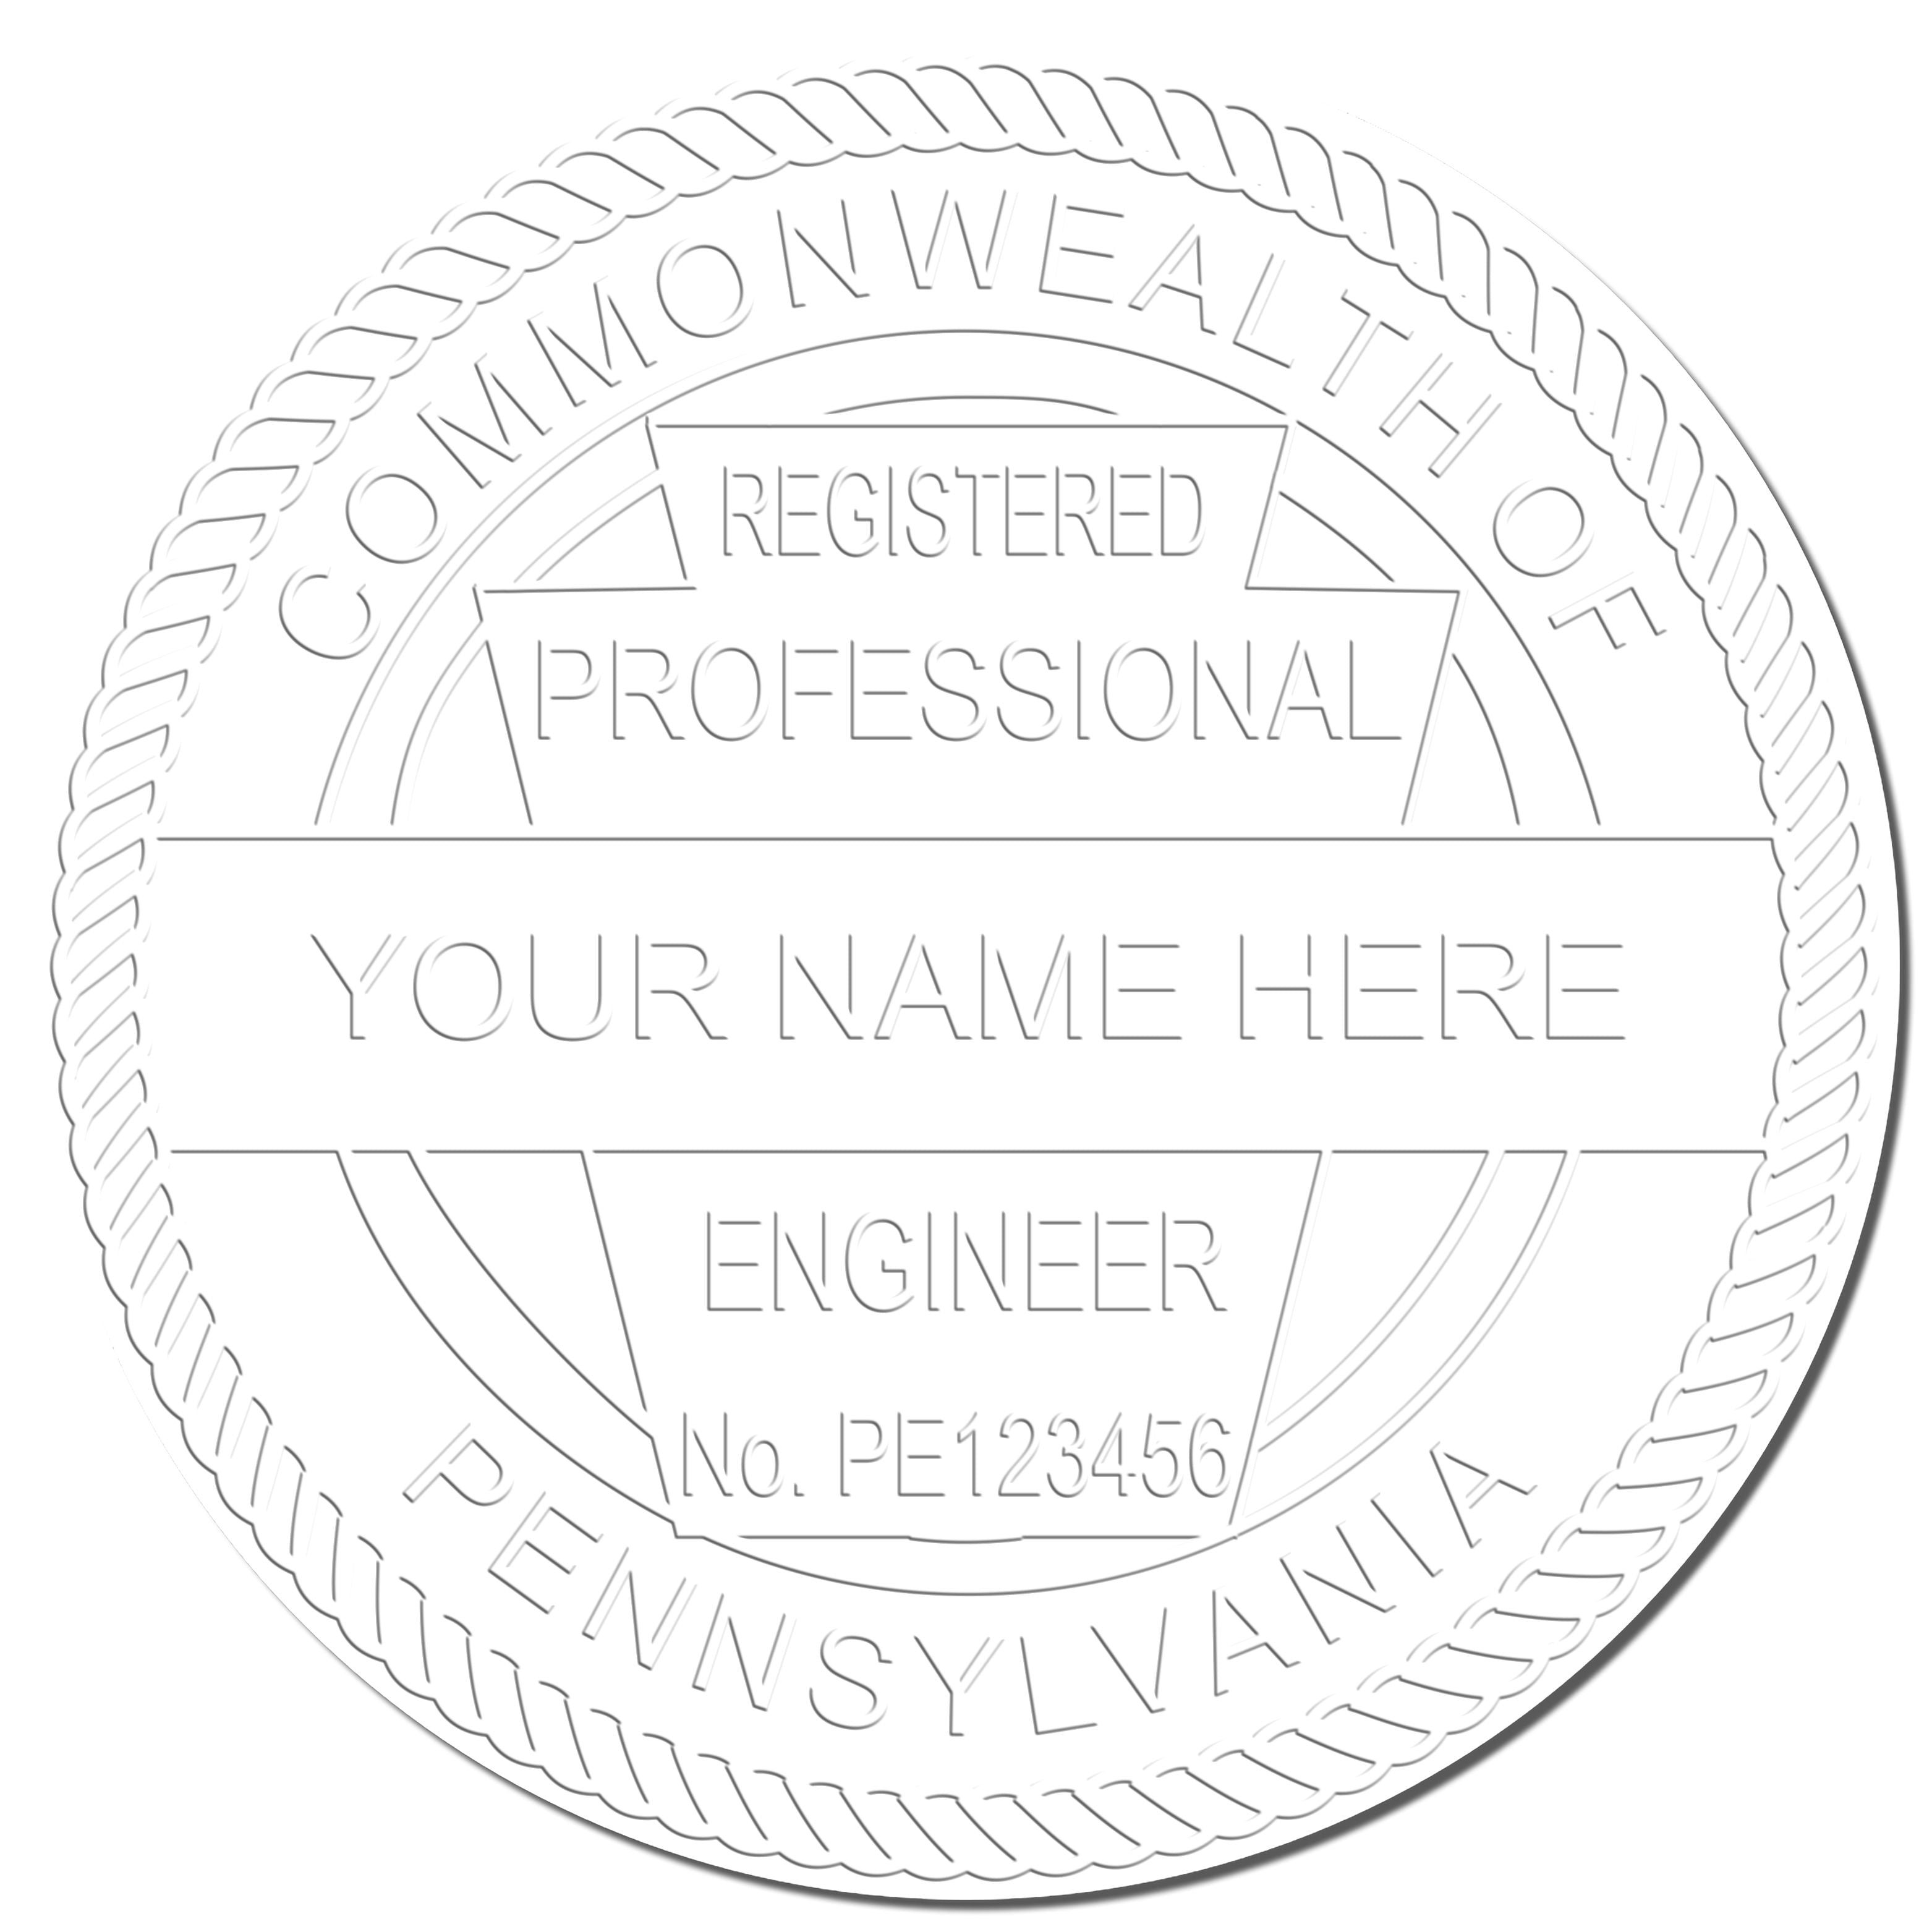 This paper is stamped with a sample imprint of the Gift Pennsylvania Engineer Seal, signifying its quality and reliability.